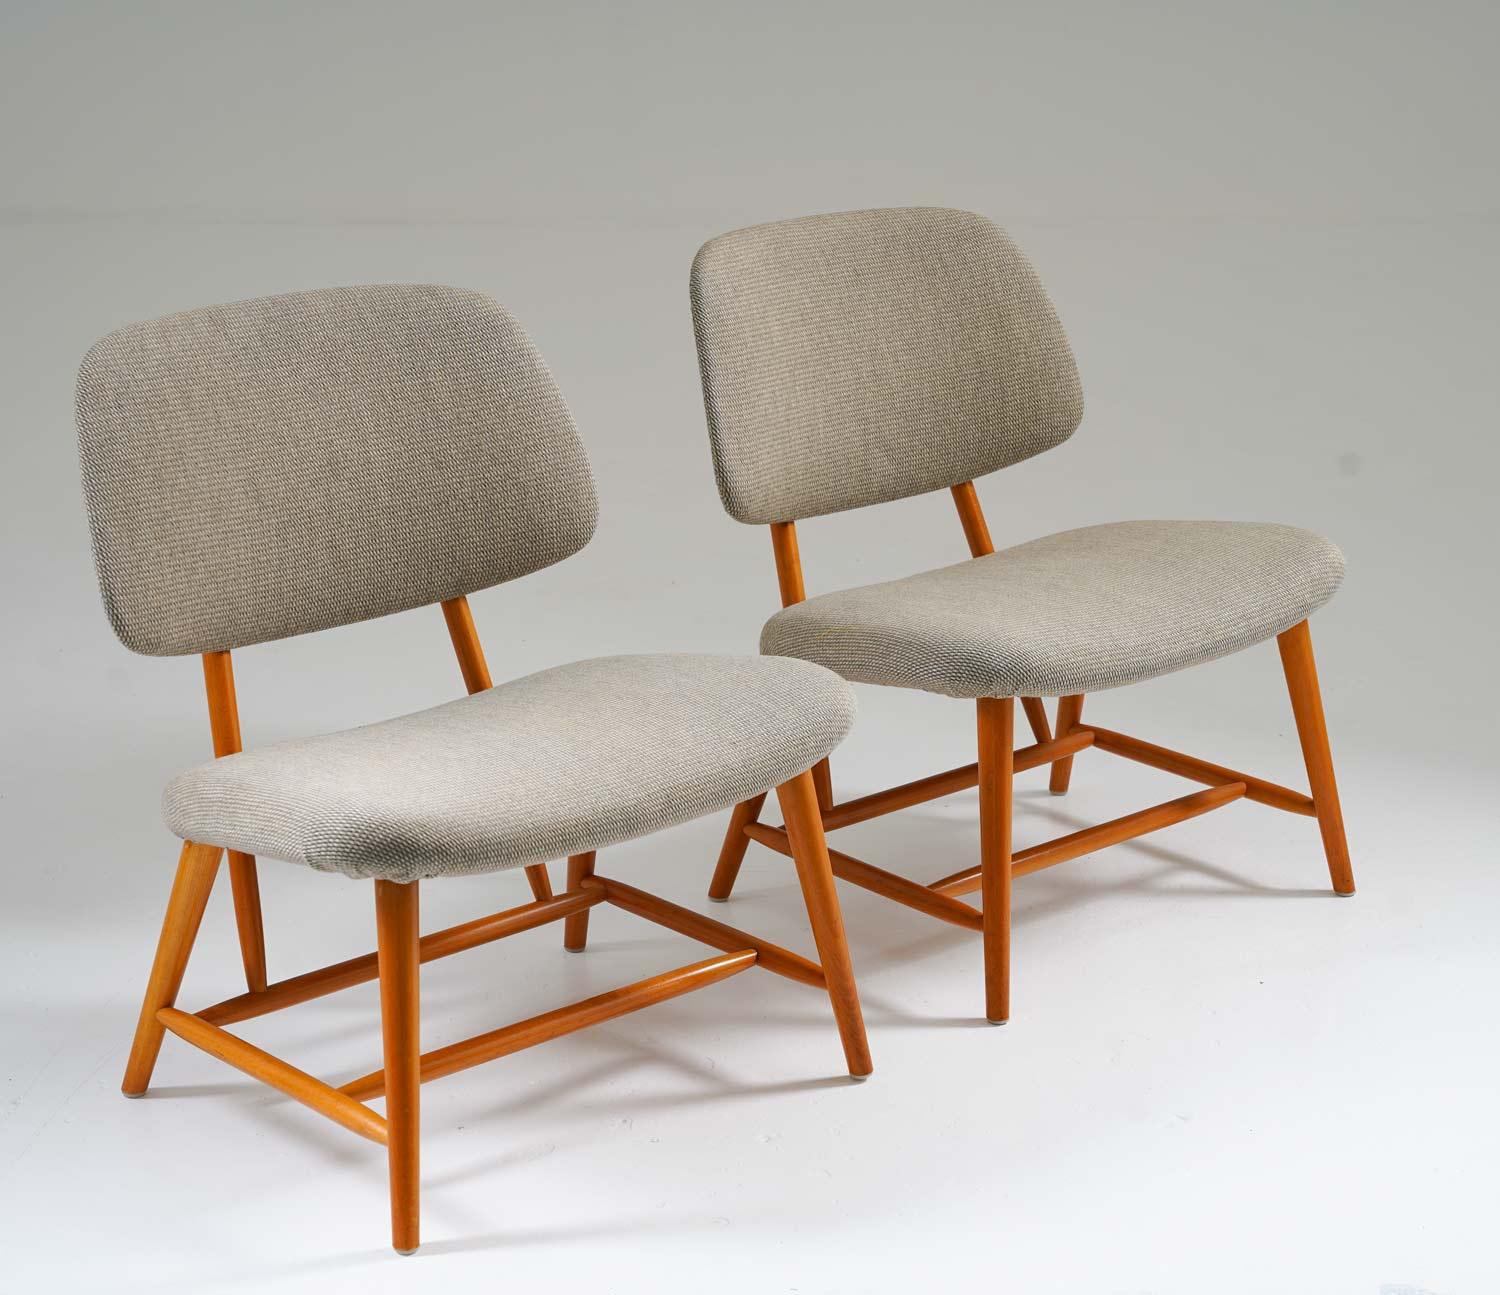 Teve" Chairs by Alf Svensson for Ljungs Industrier, 1953 For Sale at 1stDibs